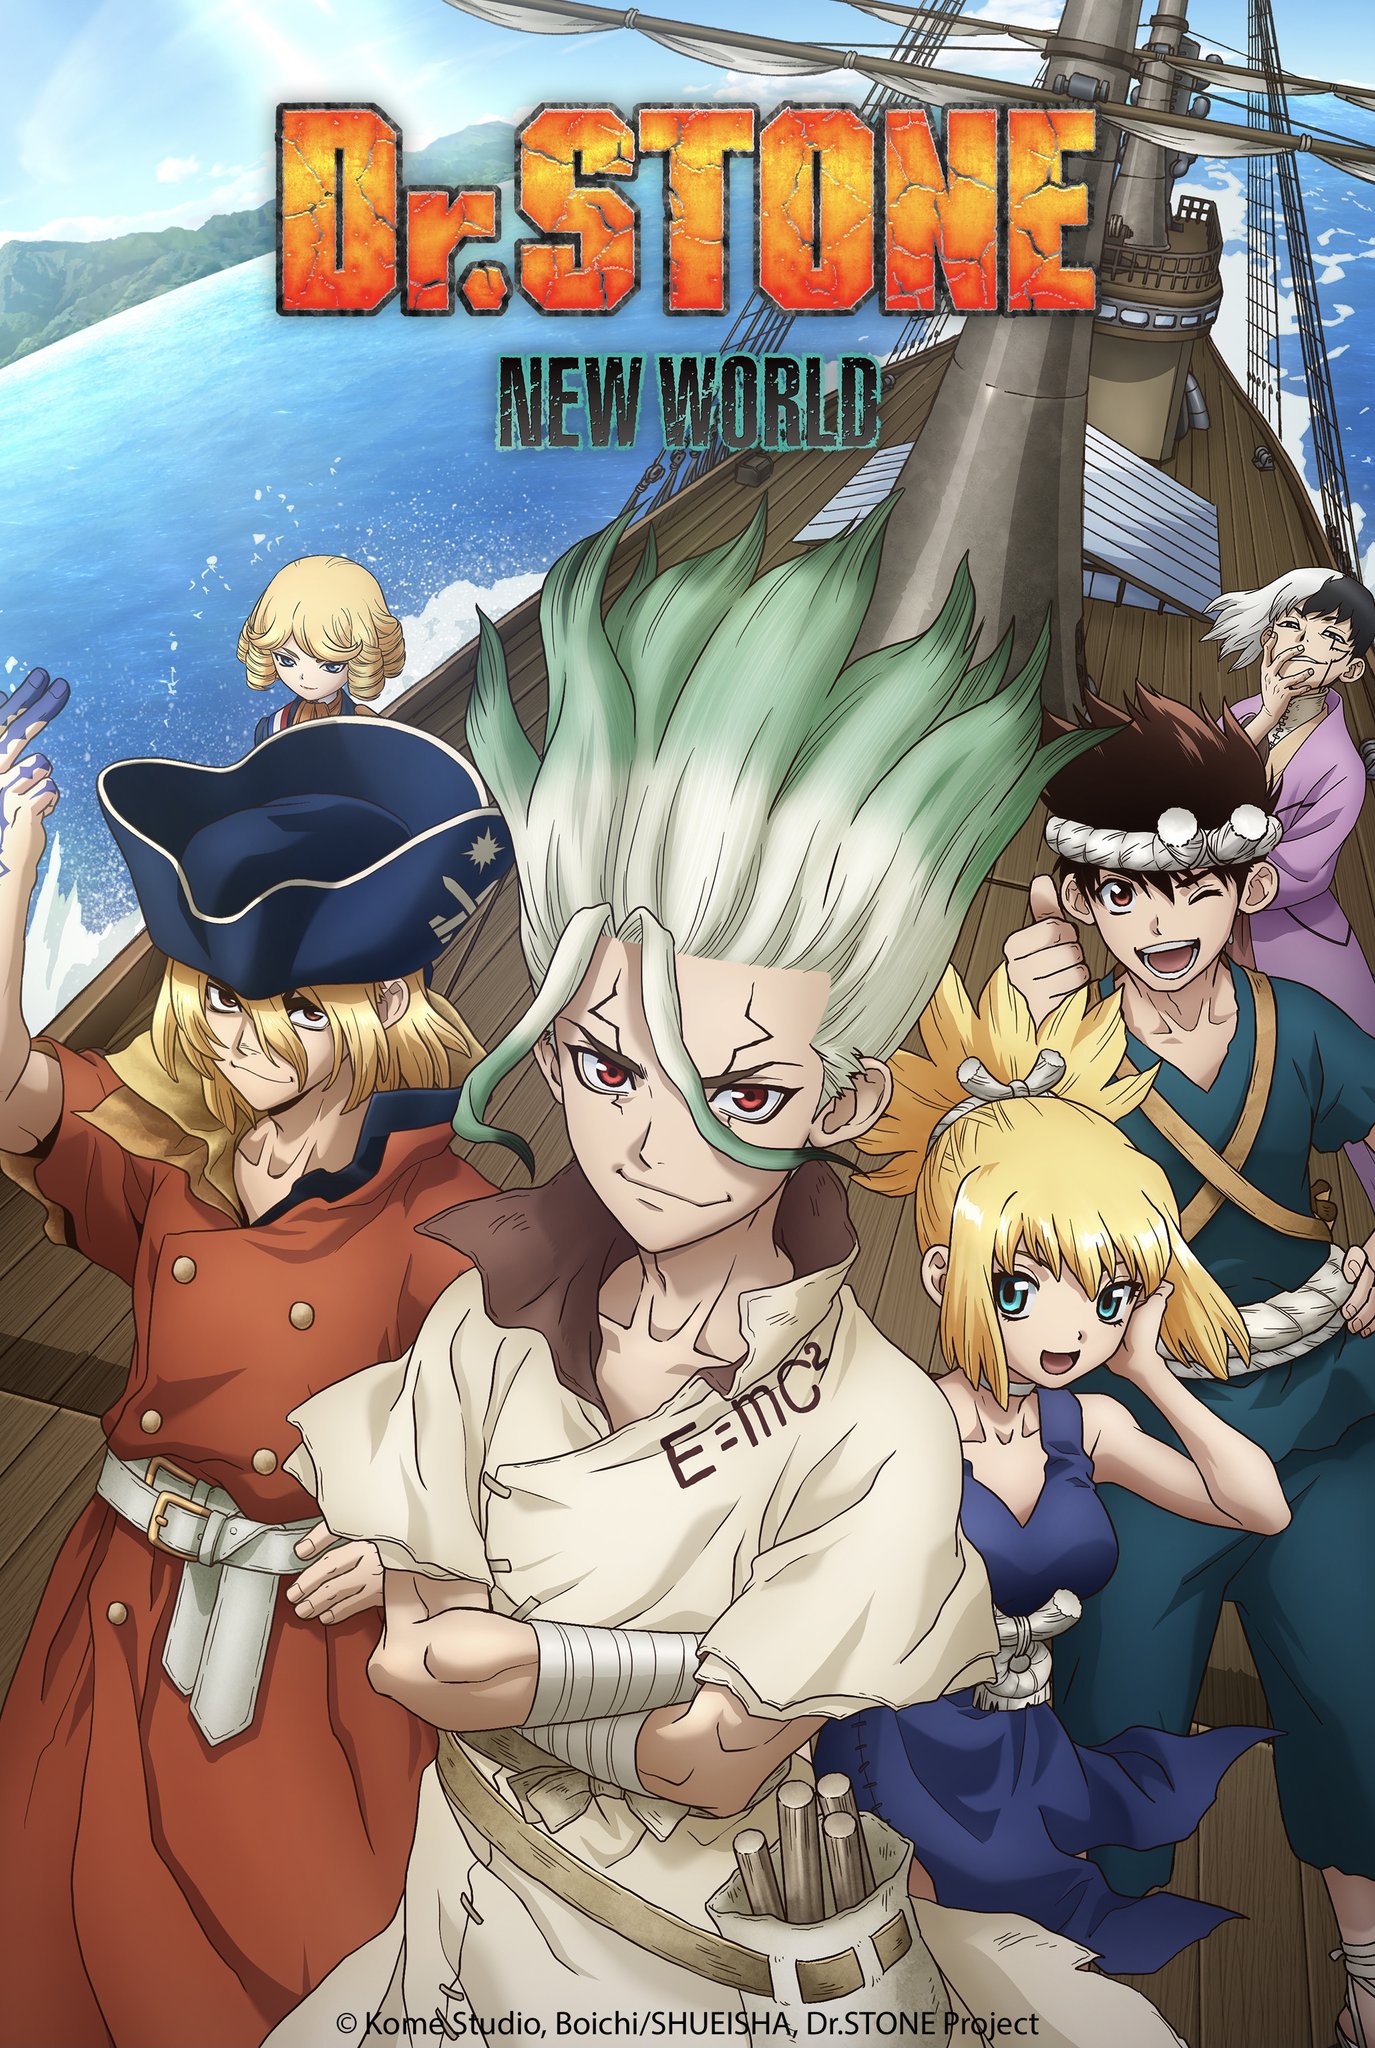 Dr. Stone Season 3 Part 2 Release Date and New World Adventures